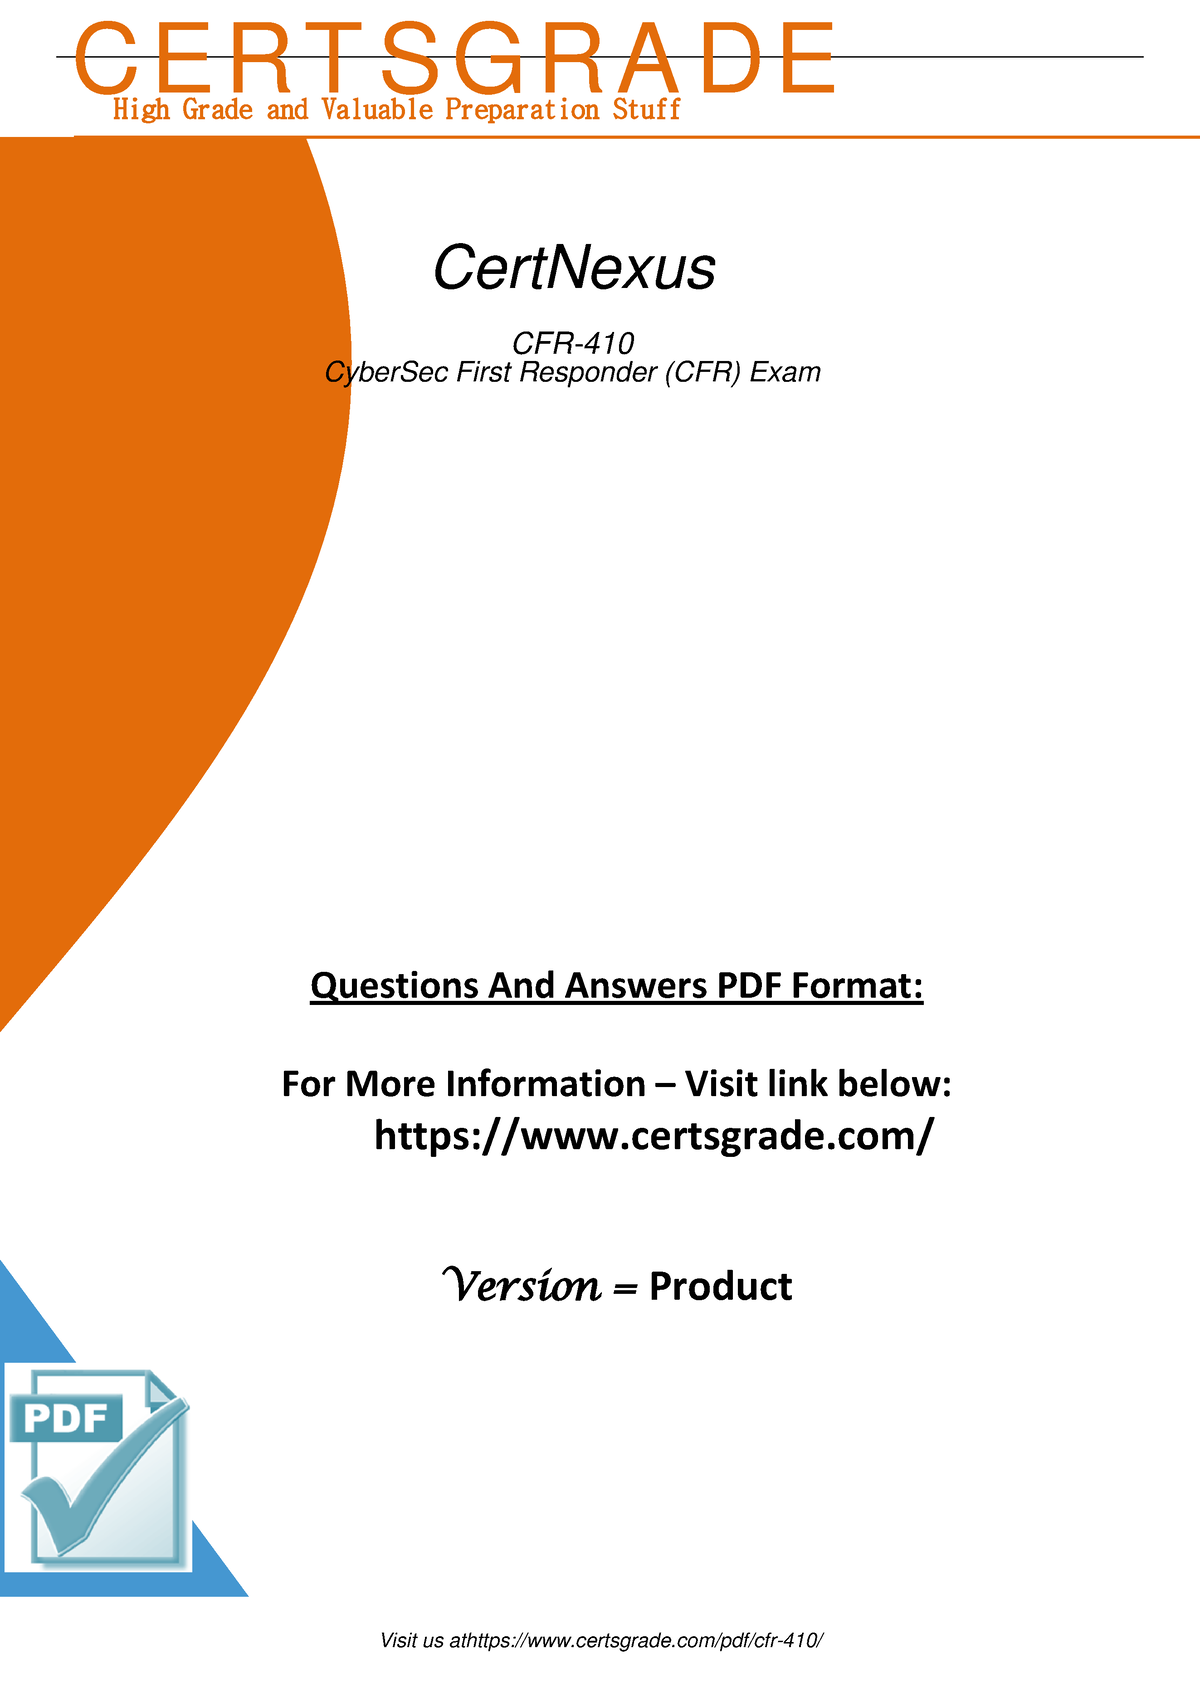 Prep CFR 410 Certification Exam With Pdf Questions ####### Questions